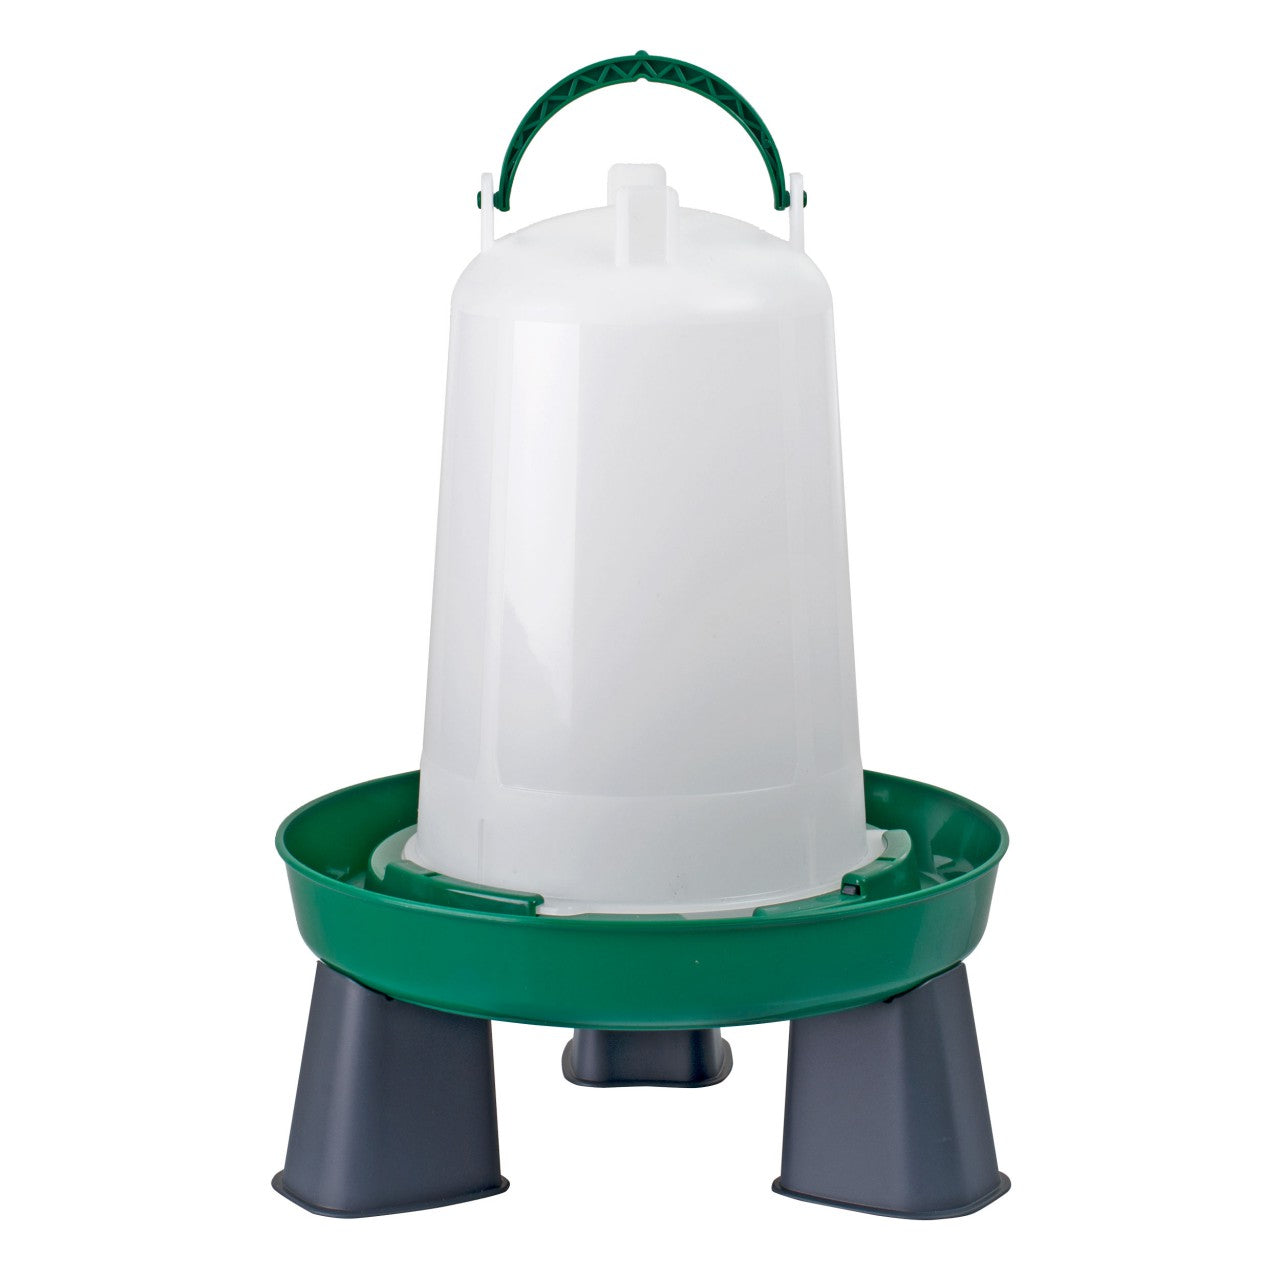 FarmHaus Waterer with legs - Various Sizes